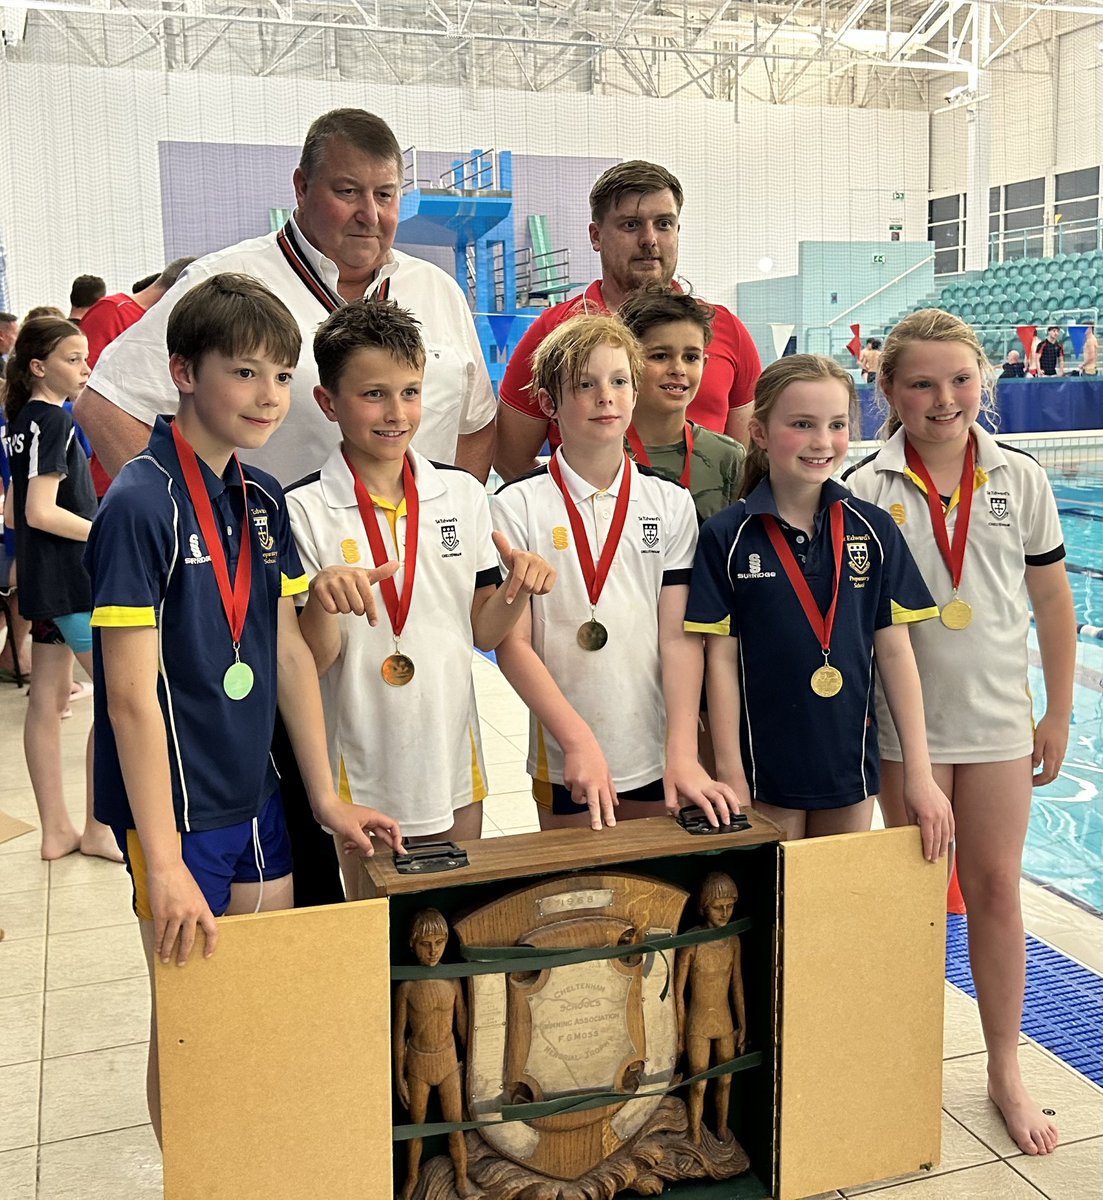 A huge well done to our U10 and U11 swimmers who won both relay competitions at the Cheltenham and District Primary Schools Swimming Gala last night at @cs_wpc - a fantastic achievement! Thanks to @AquaZoneSwim for all you do for the children.